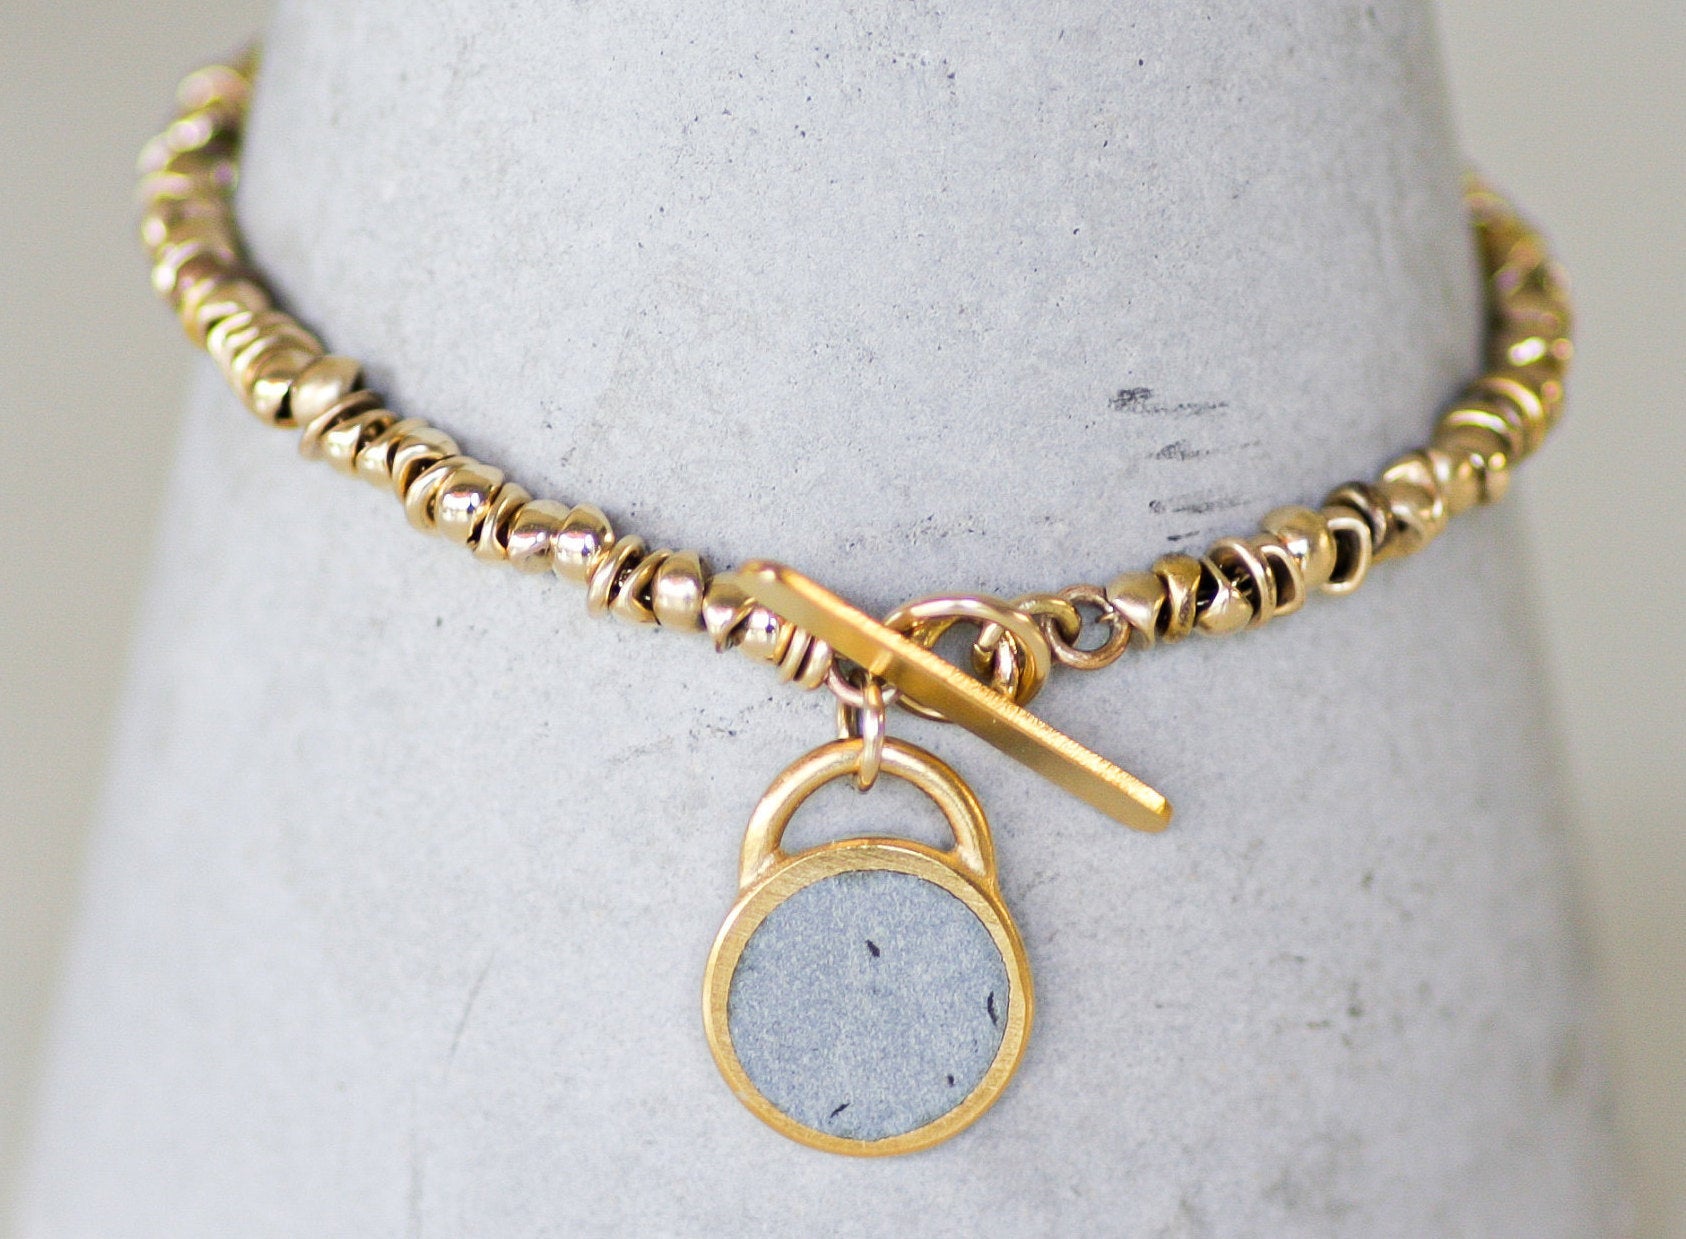 Gold Beads And Round Concrete Charm Bracelet - hs